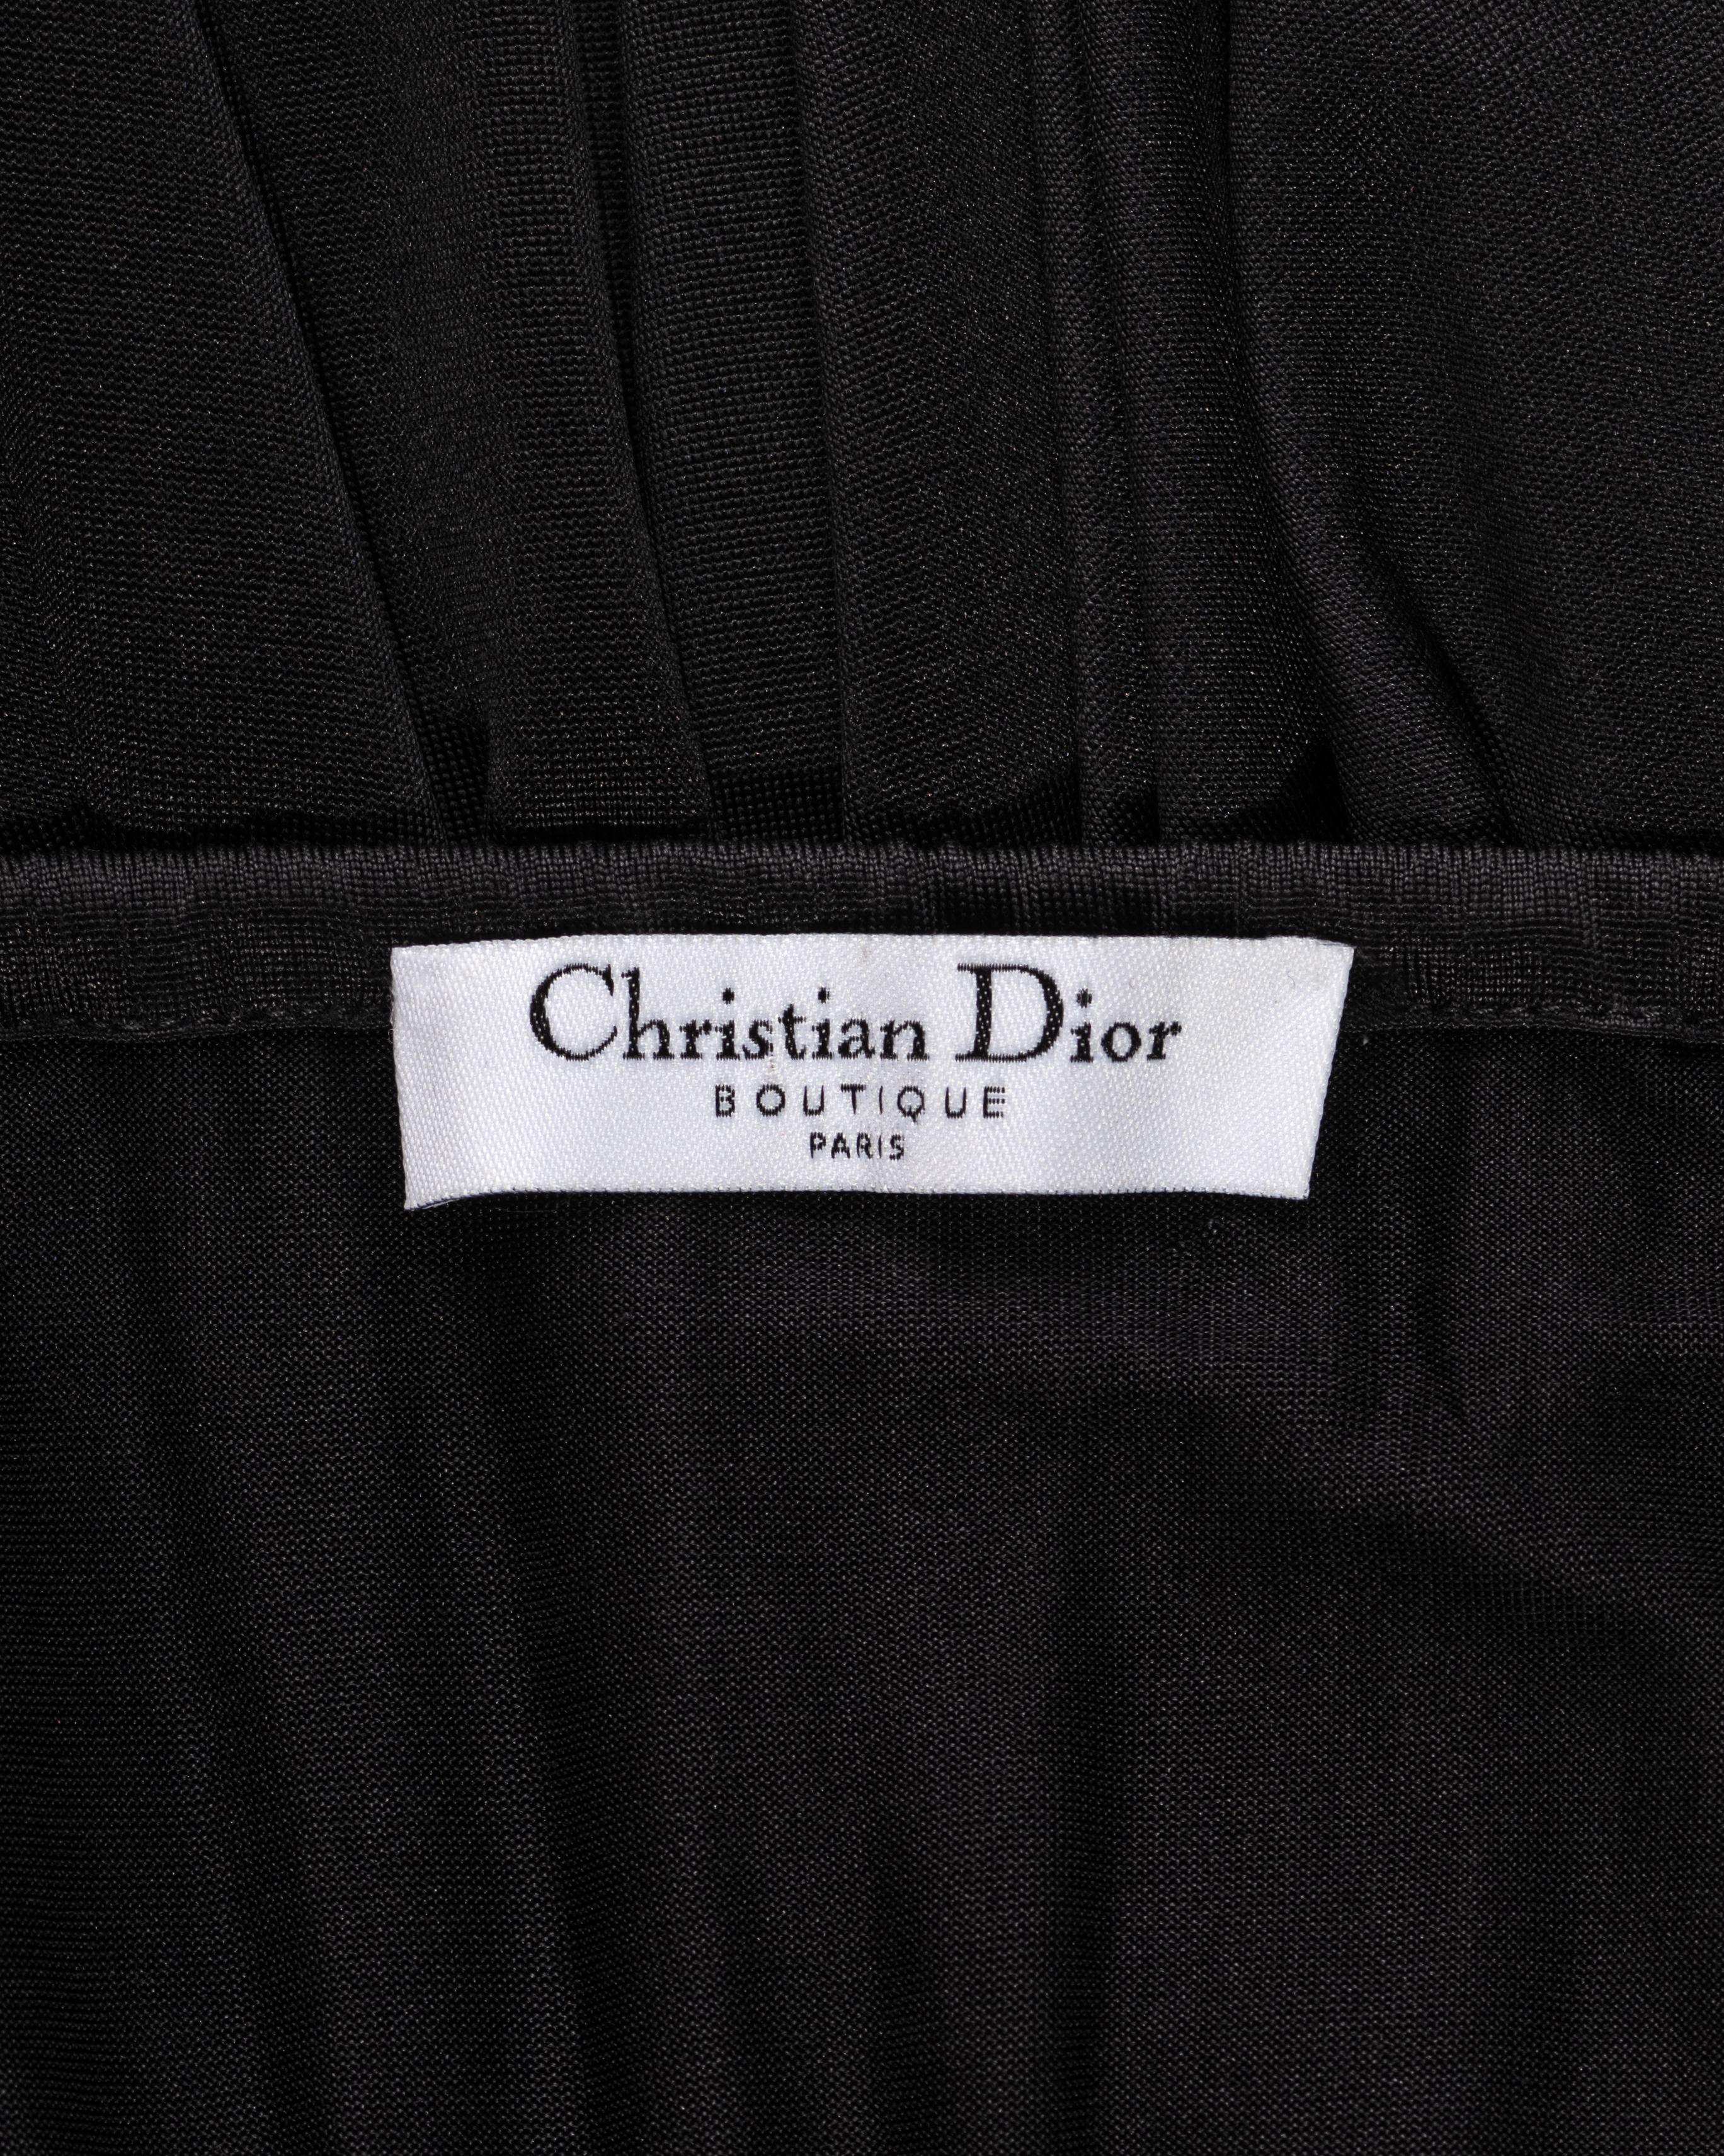 Christian Dior by John Galliano Black Viscose Embellished Draped Dress, ss 2002 For Sale 14